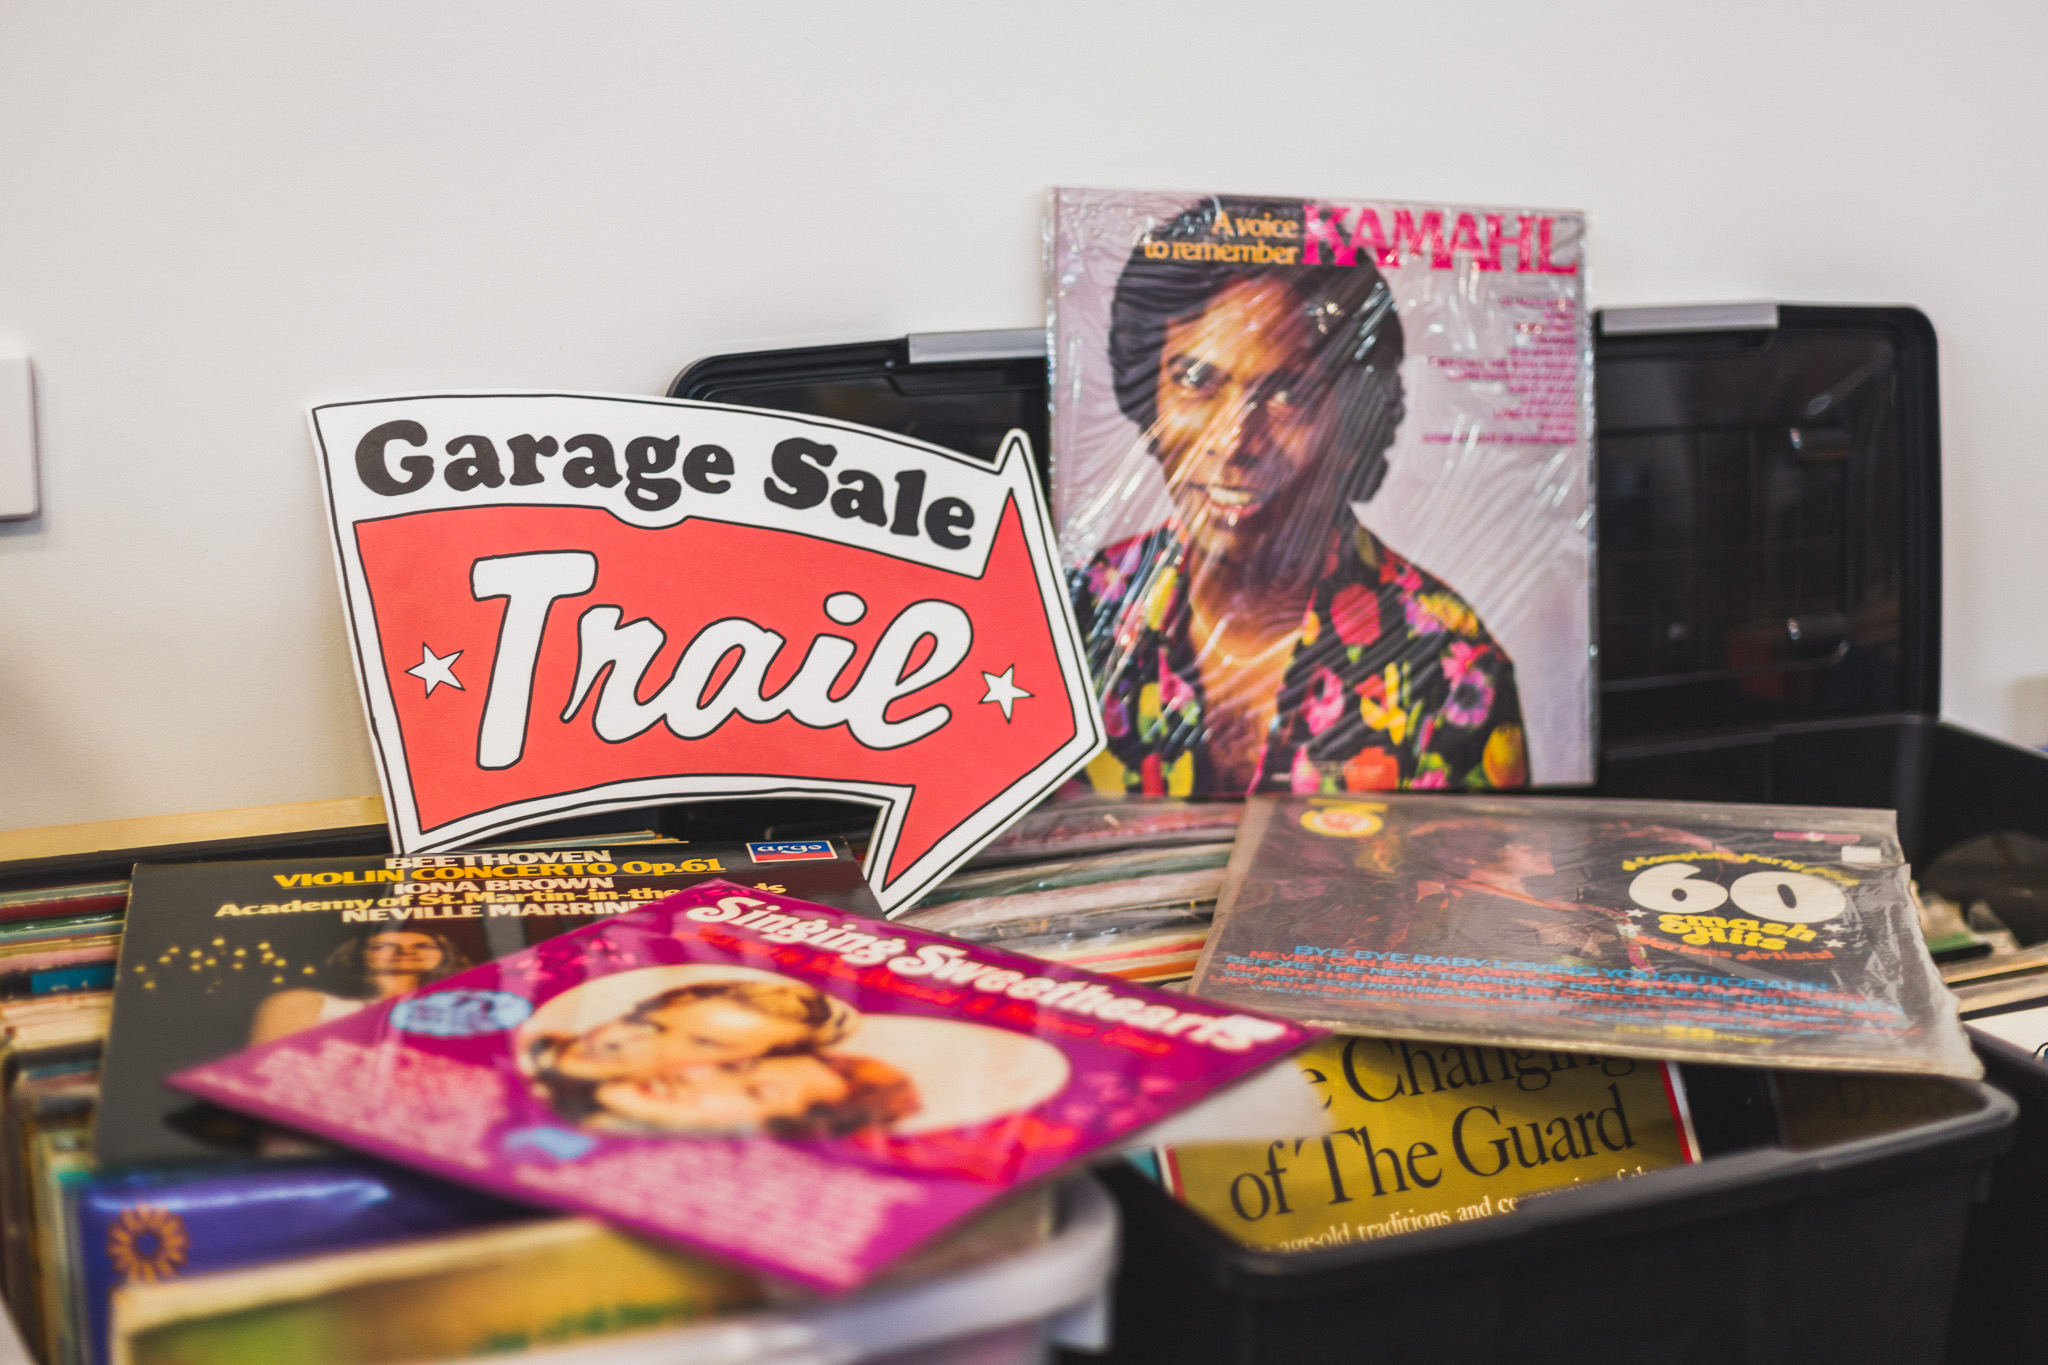 vinyl records on table with Garage Sale Trail sign